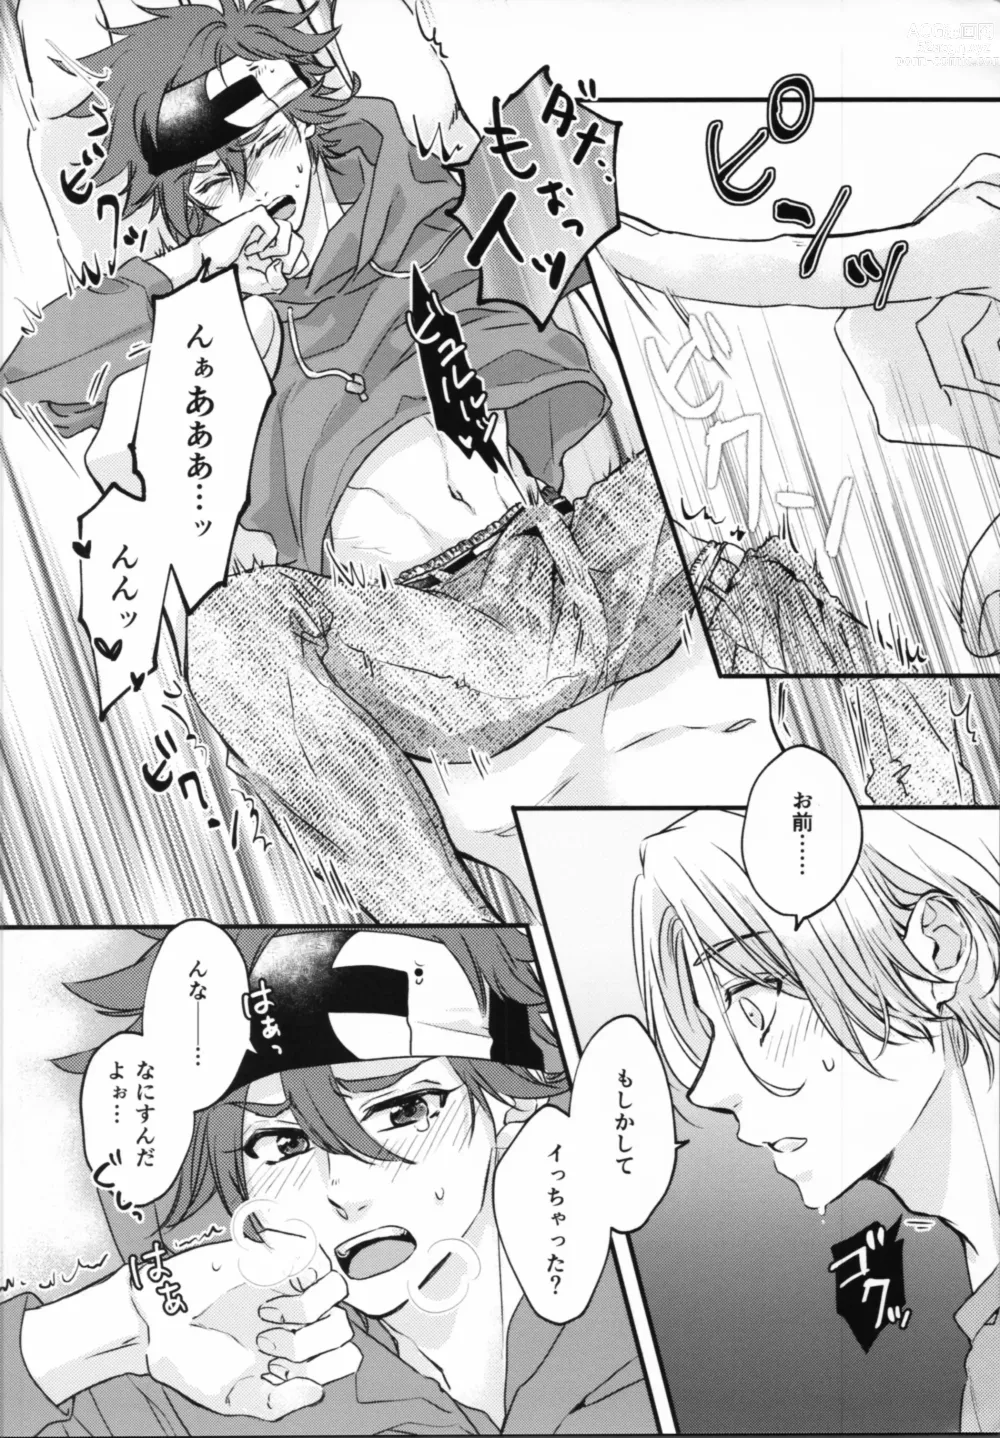 Page 11 of doujinshi Little funny Monster